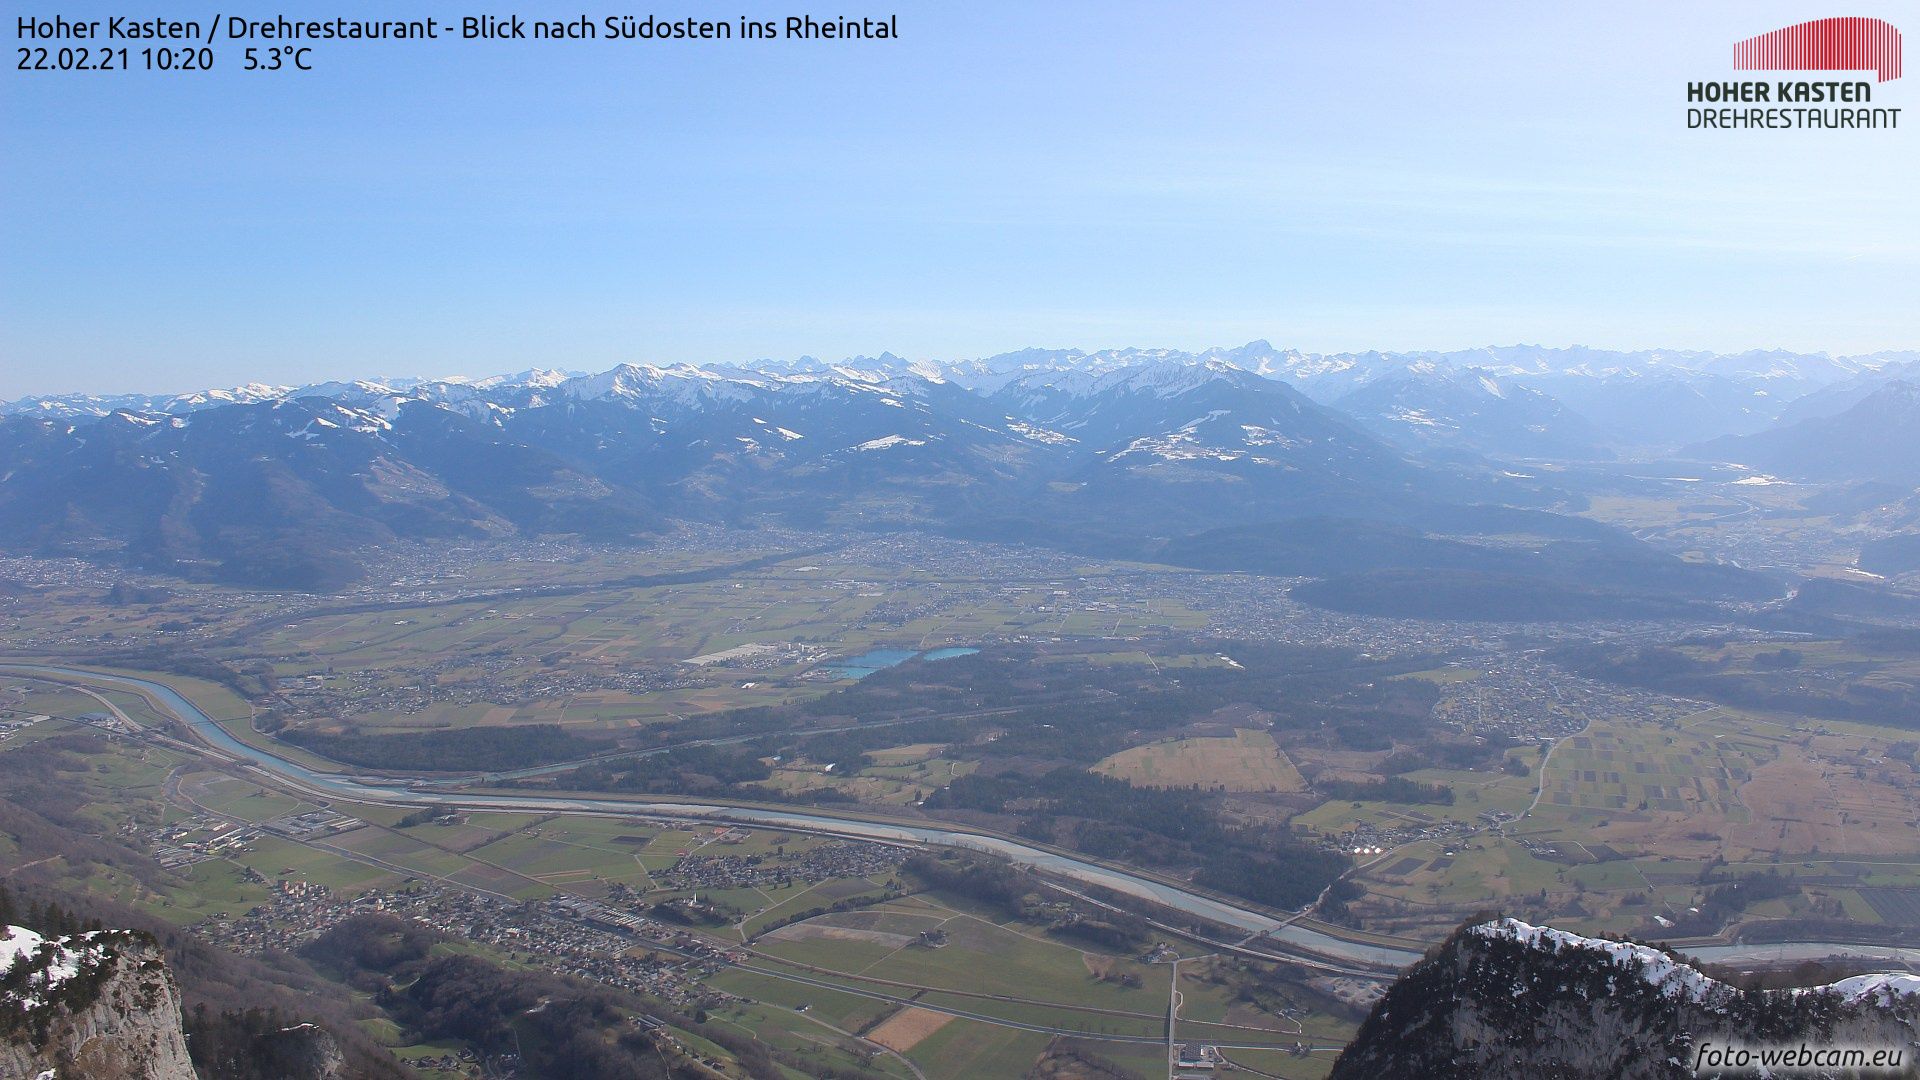 Spring in the Rhine Valley with temperatures above 20 degrees (photo-webcam.eu)